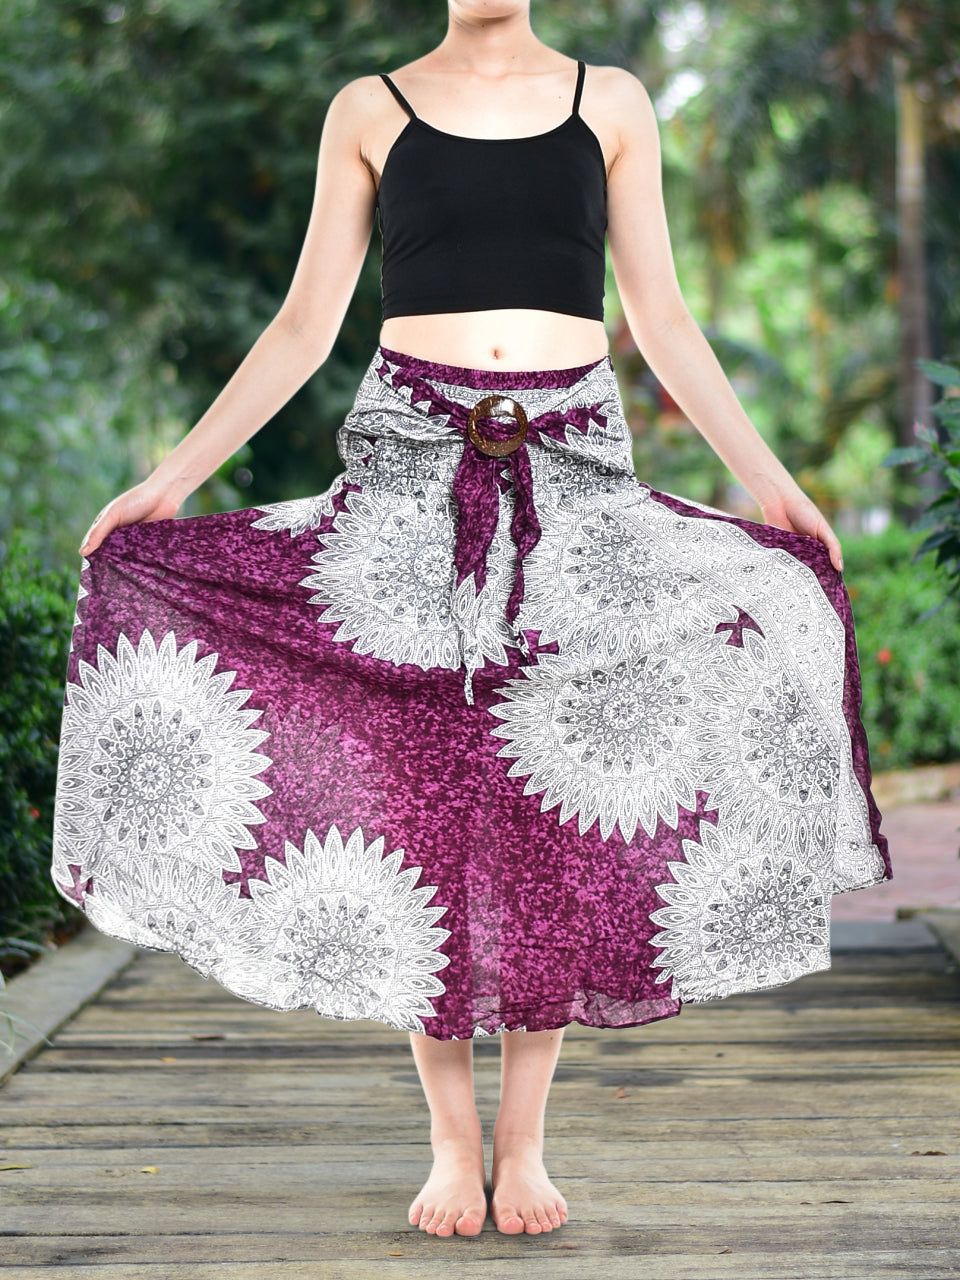 Bohotusk Purple Snowflake Long Skirt With Coconut Buckle (& Strapless Dress) S/M Only